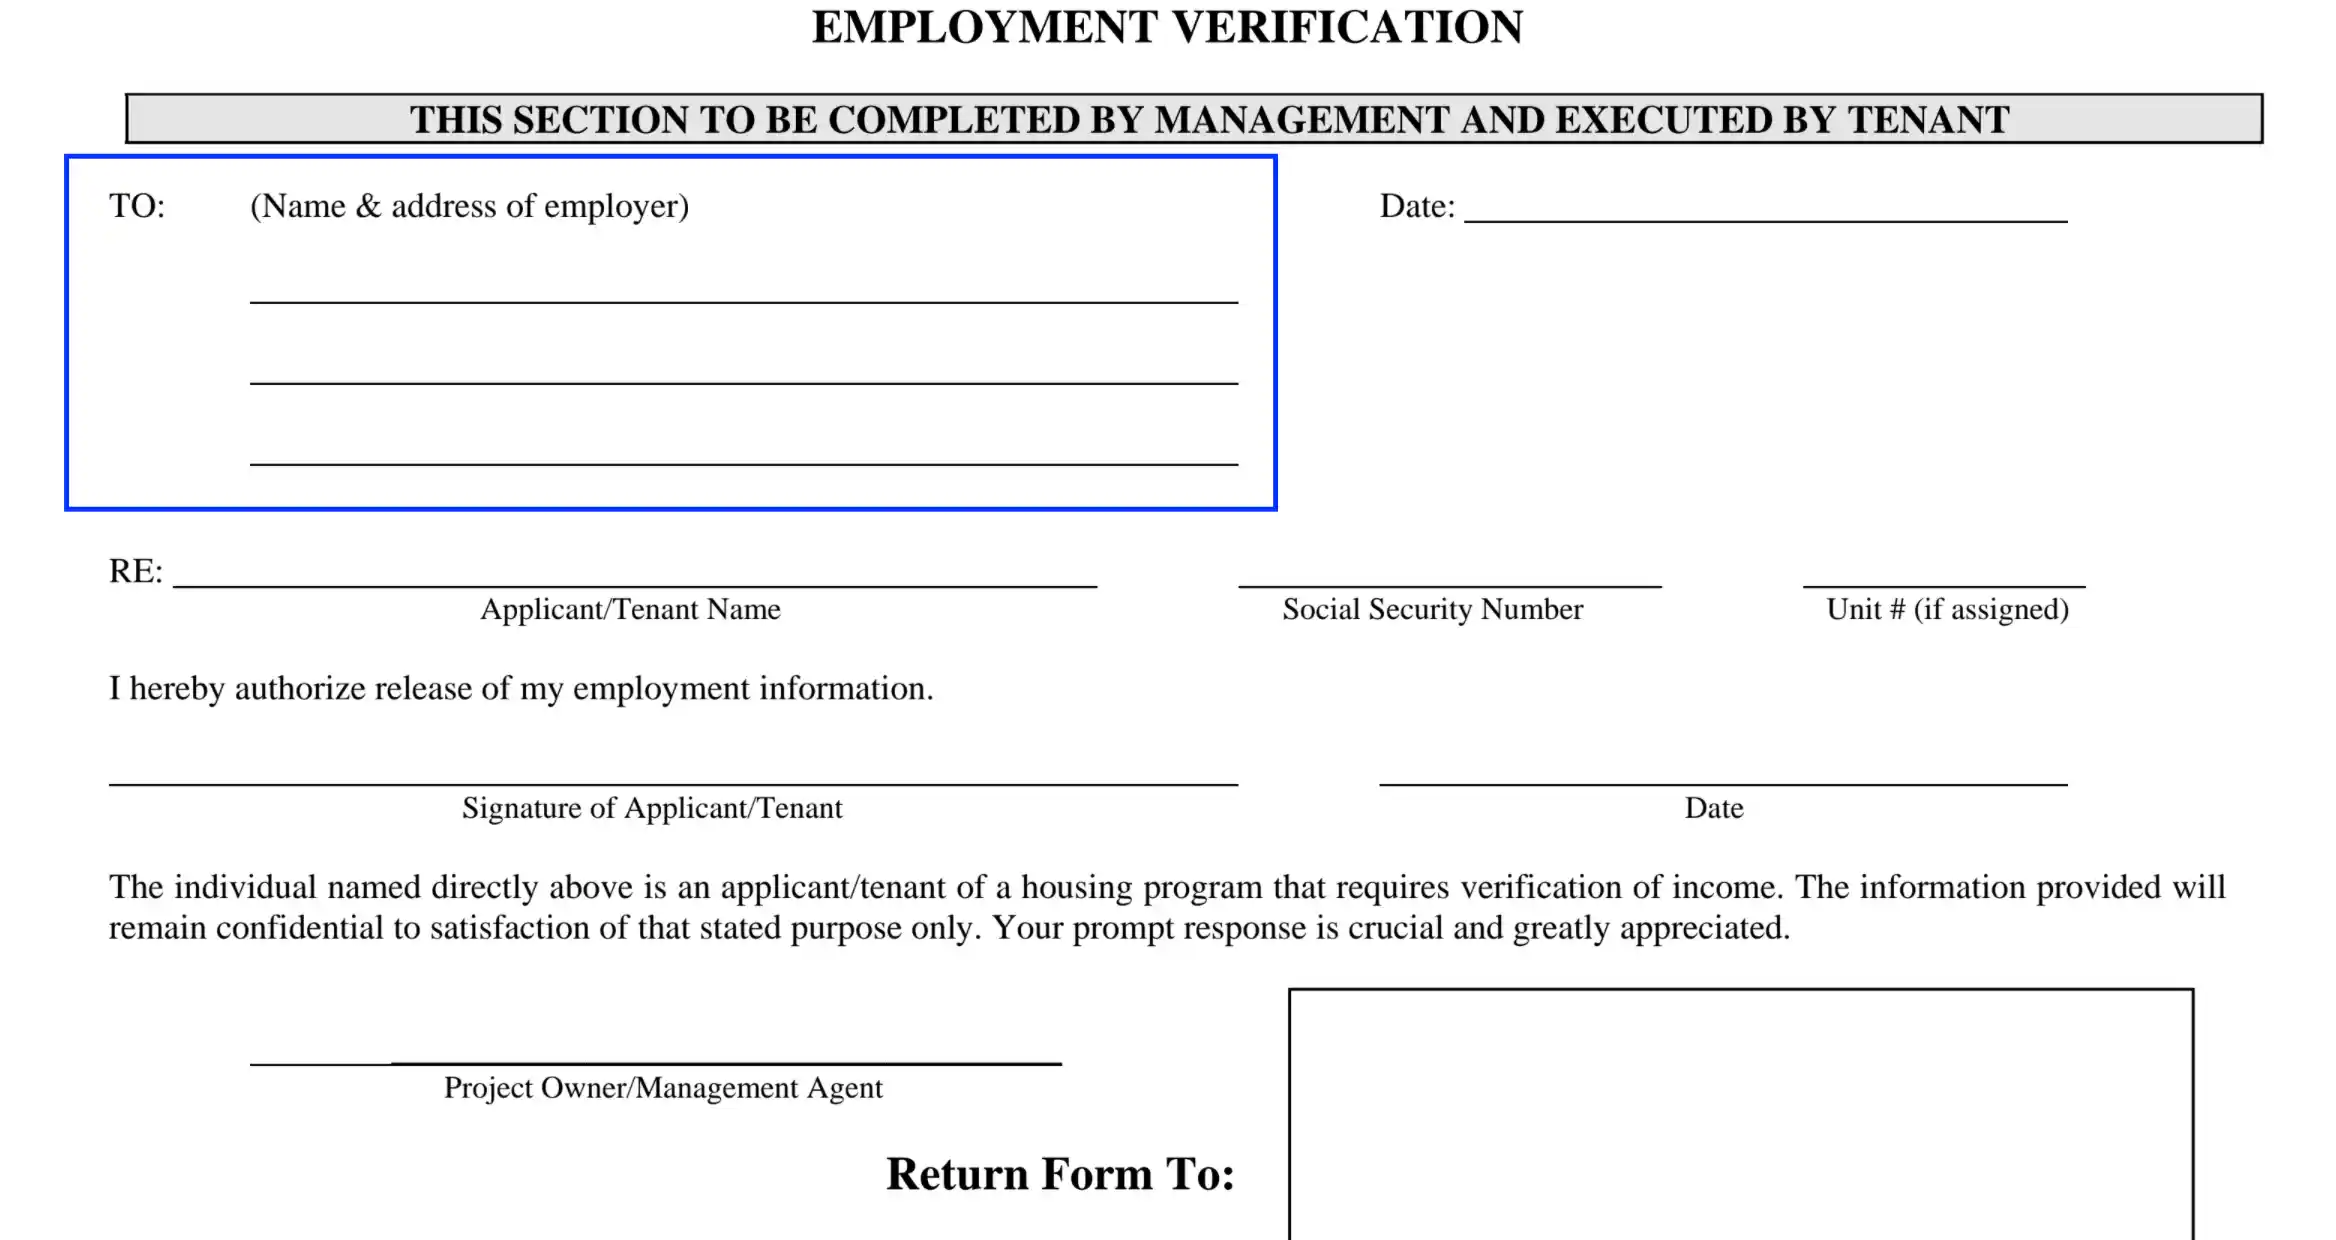 employment verification form evf fill out work income pdf